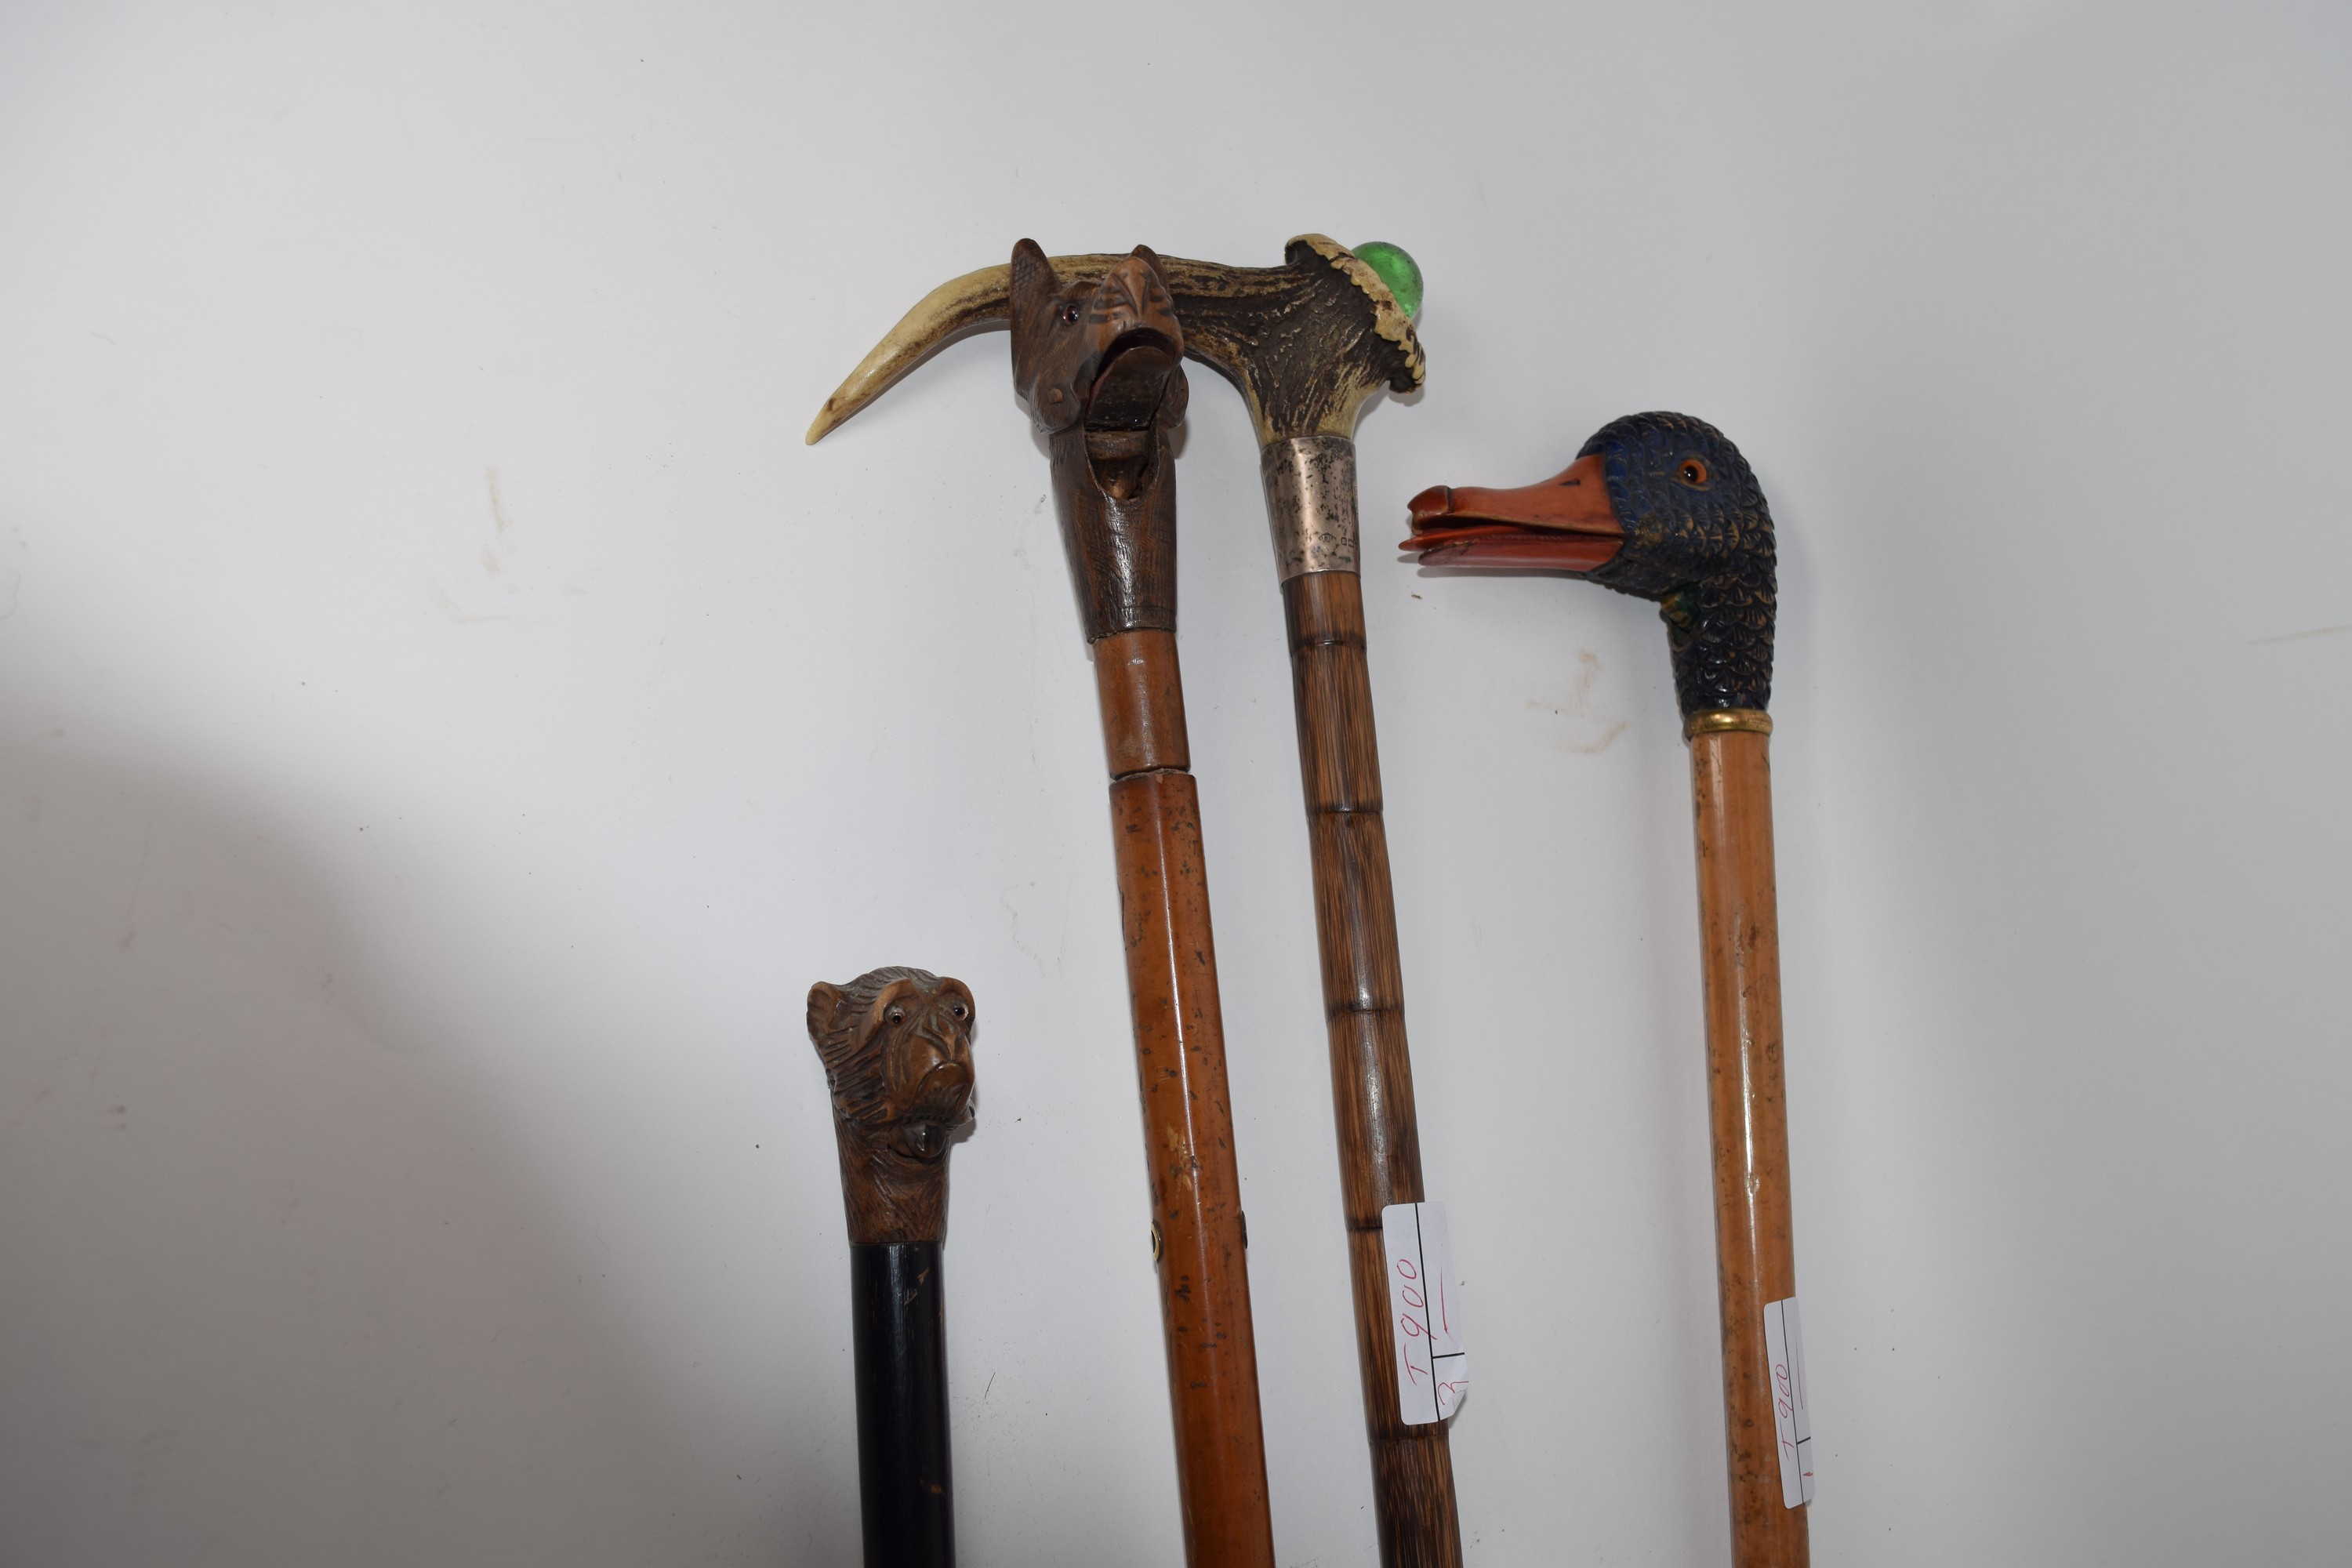 Group of walking canes modelled with various heads, including a duck's head with glass eyes, a - Image 2 of 2